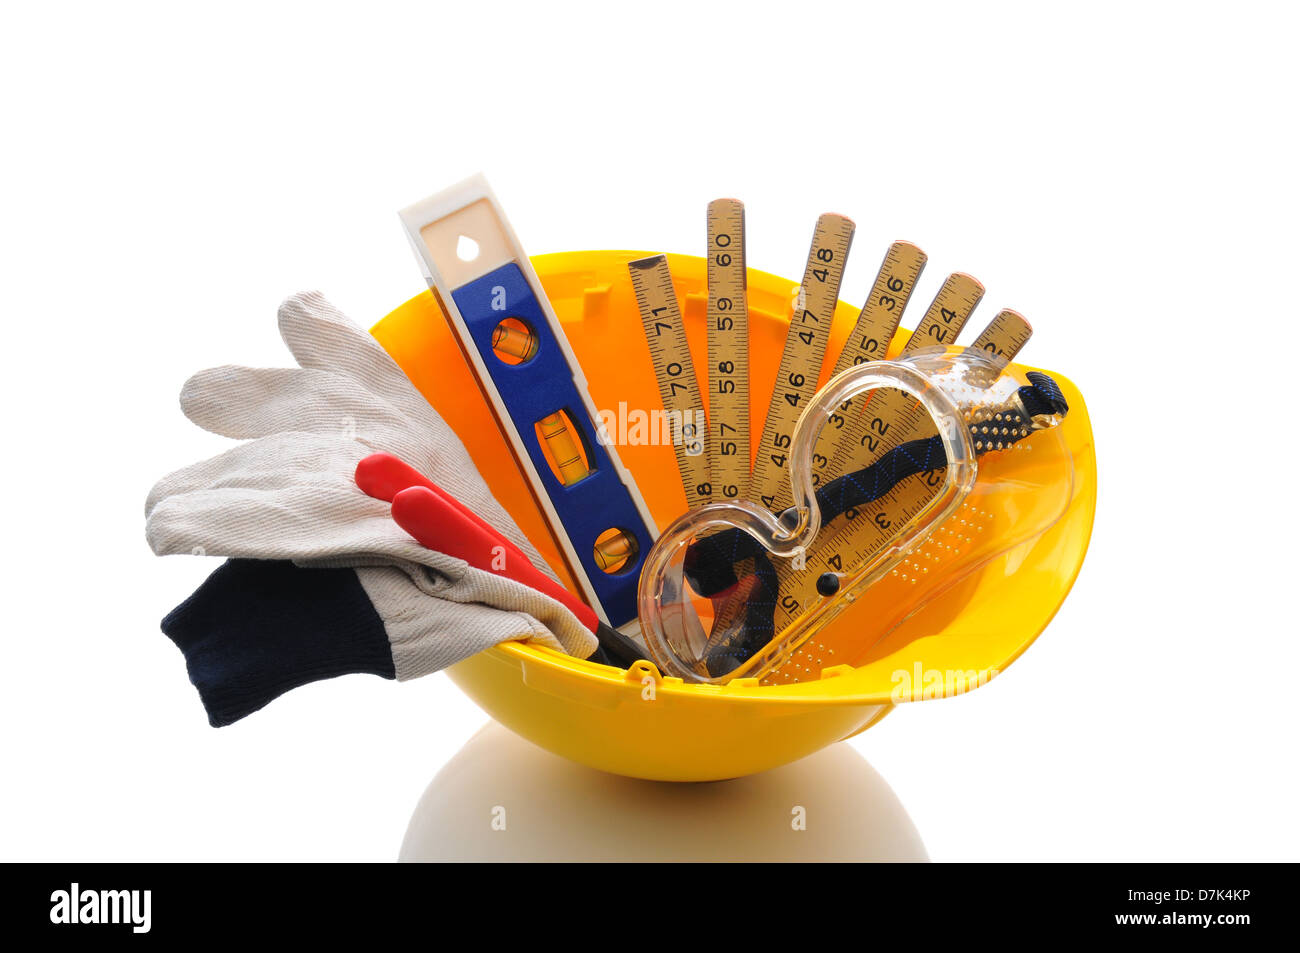 A yellow contractors hard hat with work gloves and tools inside. Horizontal format over white with reflection. Stock Photo